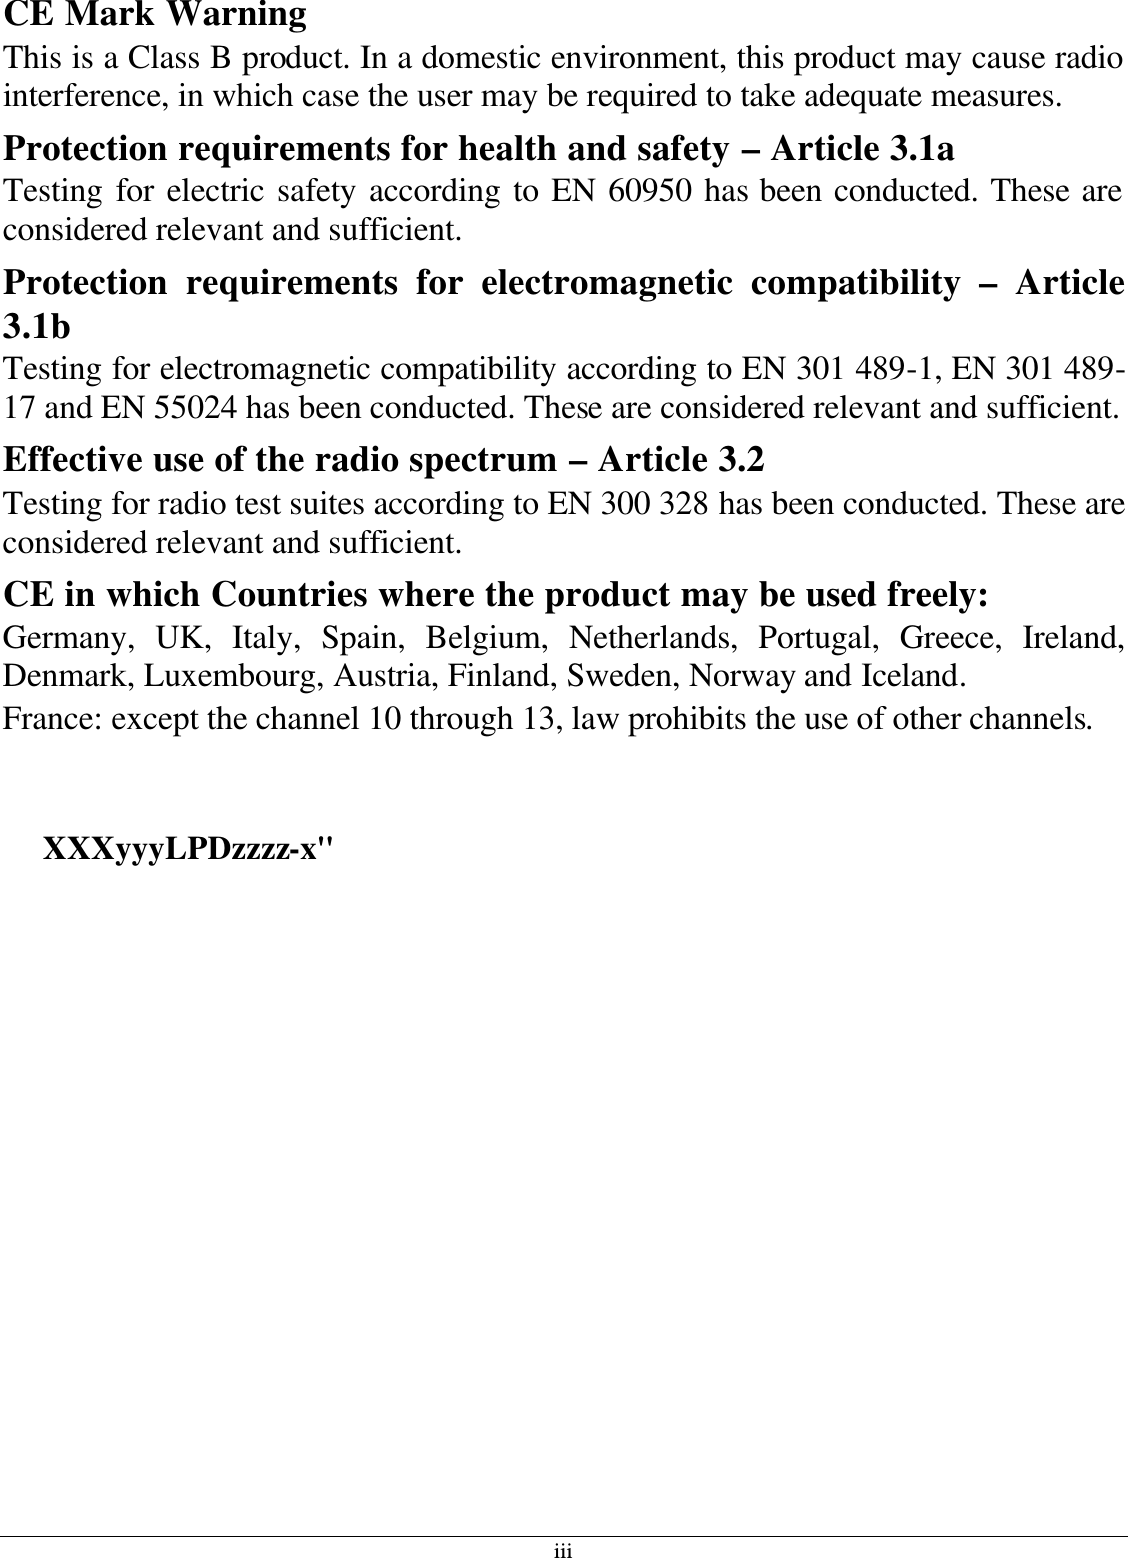 iii CE Mark Warning This is a Class B product. In a domestic environment, this product may cause radio interference, in which case the user may be required to take adequate measures. Protection requirements for health and safety – Article 3.1a Testing for electric safety according to EN 60950 has been conducted. These are considered relevant and sufficient. Protection requirements for electromagnetic compatibility – Article 3.1b Testing for electromagnetic compatibility according to EN 301 489-1, EN 301 489-17 and EN 55024 has been conducted. These are considered relevant and sufficient. Effective use of the radio spectrum – Article 3.2 Testing for radio test suites according to EN 300 328 has been conducted. These are considered relevant and sufficient. CE in which Countries where the product may be used freely: Germany, UK, Italy, Spain, Belgium, Netherlands, Portugal, Greece, Ireland, Denmark, Luxembourg, Austria, Finland, Sweden, Norway and Iceland. France: except the channel 10 through 13, law prohibits the use of other channels.  使用本產品之系統製造商請於設備上標示本產品內含射頻模組:     XXXyyyLPDzzzz-x&quot;   經型式認證合格之低功率射頻電機，非經許可，公司、商號或使用者均不得擅自變更頻率、加大功率或變更原設計之特性及功能。  低功率射頻電機之使用不得影響飛航安全及干擾合法通信；經發現有干擾現象時，應立即停用，並改善至無干擾時方得繼續使用。前項合法通信，指依電信法規定作業之無線電通信。低功率射頻電機須忍受合法通信或工業、科學及醫療用電波輻射性電機設備之干擾。 工作頻率 5.250 ~ 5.350GHz 該頻段限於室內使用         